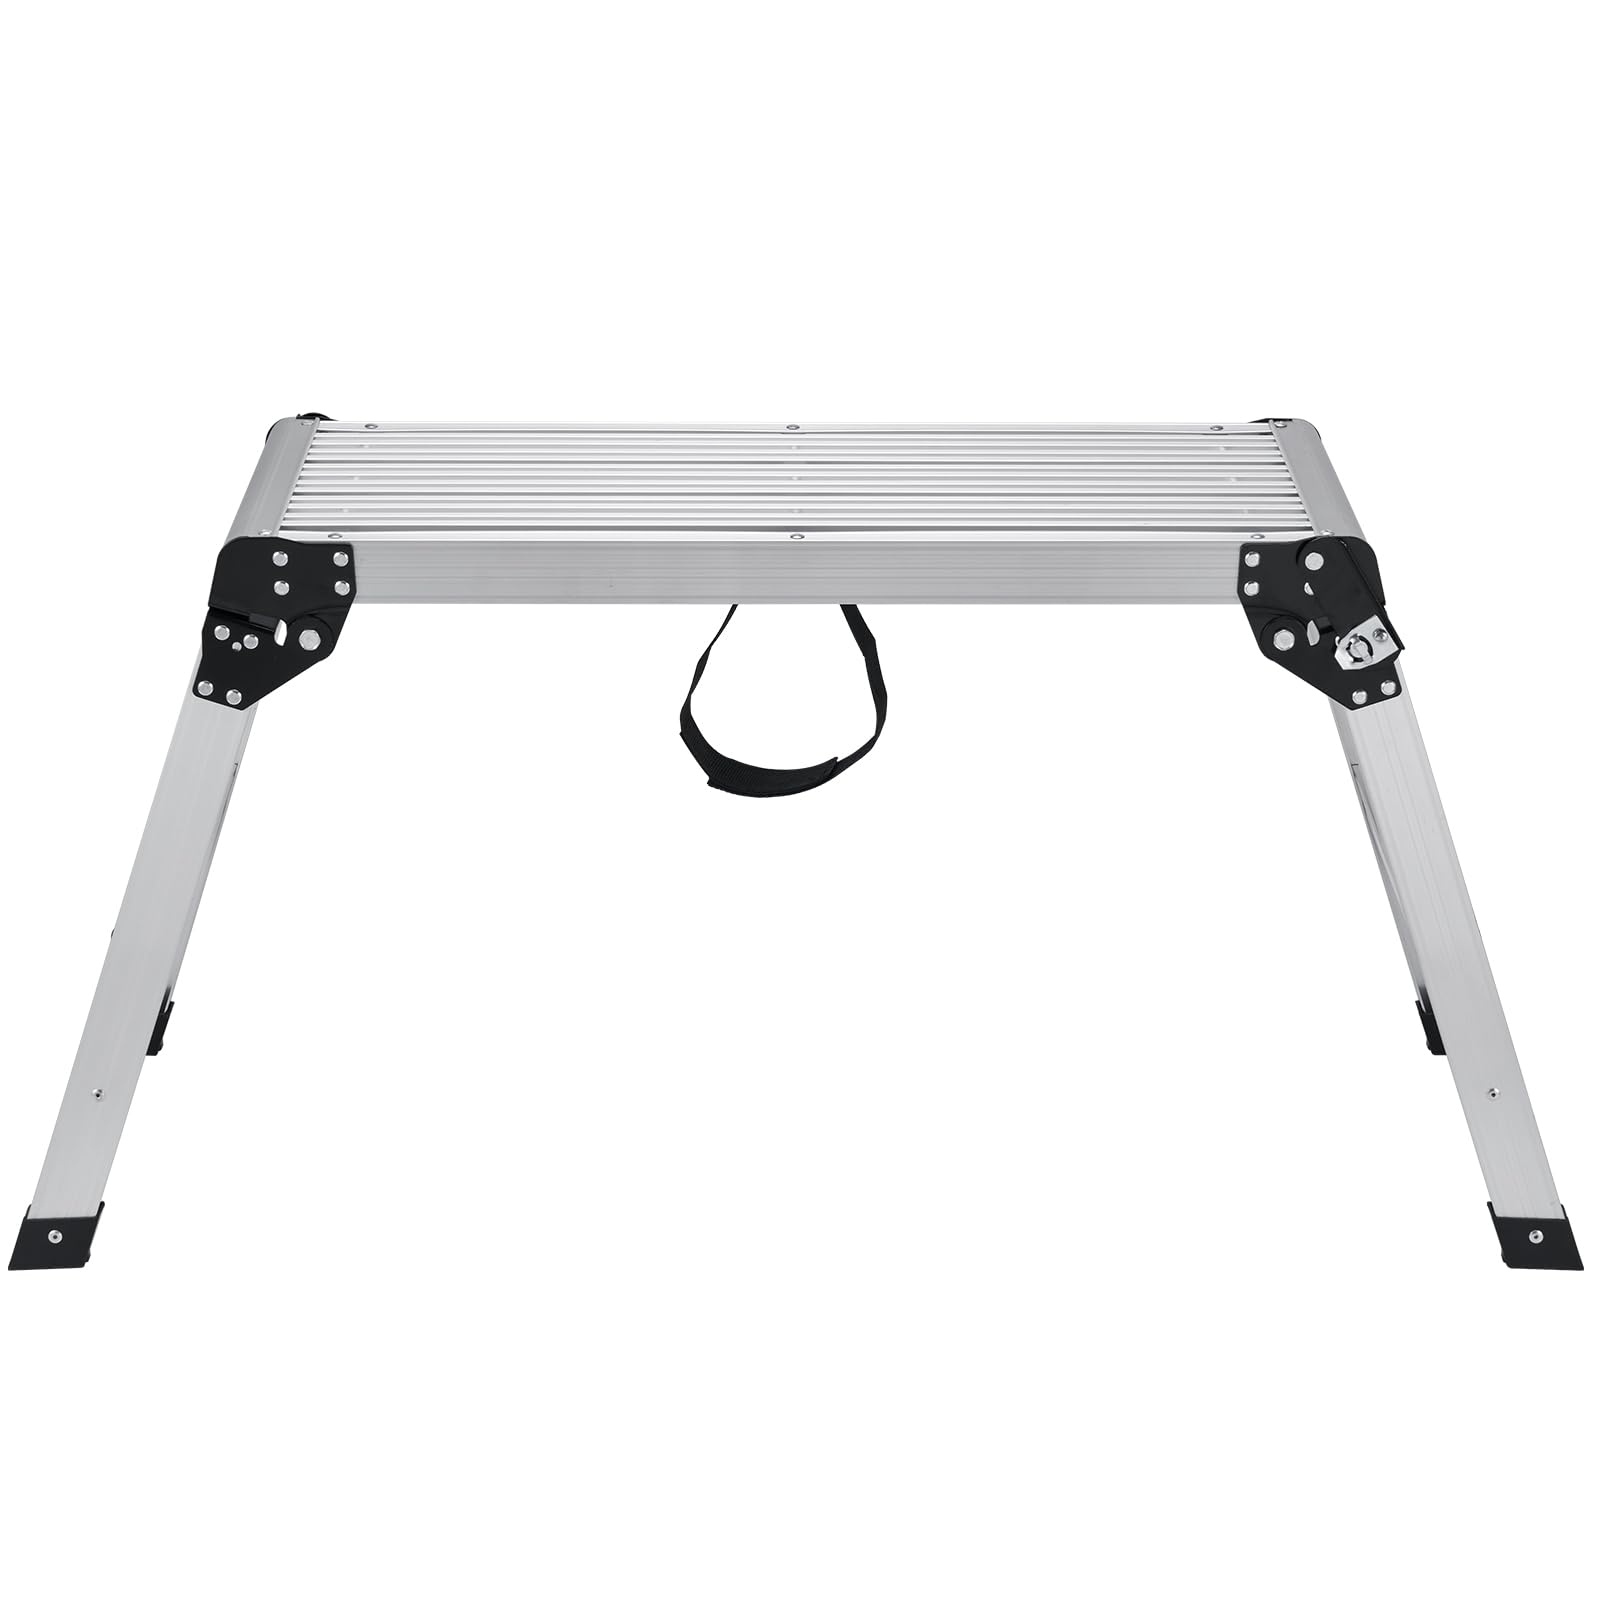 VEVOR Folding Work Platform, 30x12x20 Inch Aluminum Drywall Stool Ladder, 330 lbs Load Capacity Heavy Duty Work Bench w/Non-Slip Feet, Ideal for Washing Vehicles, Cleaning, Painting, Decorating